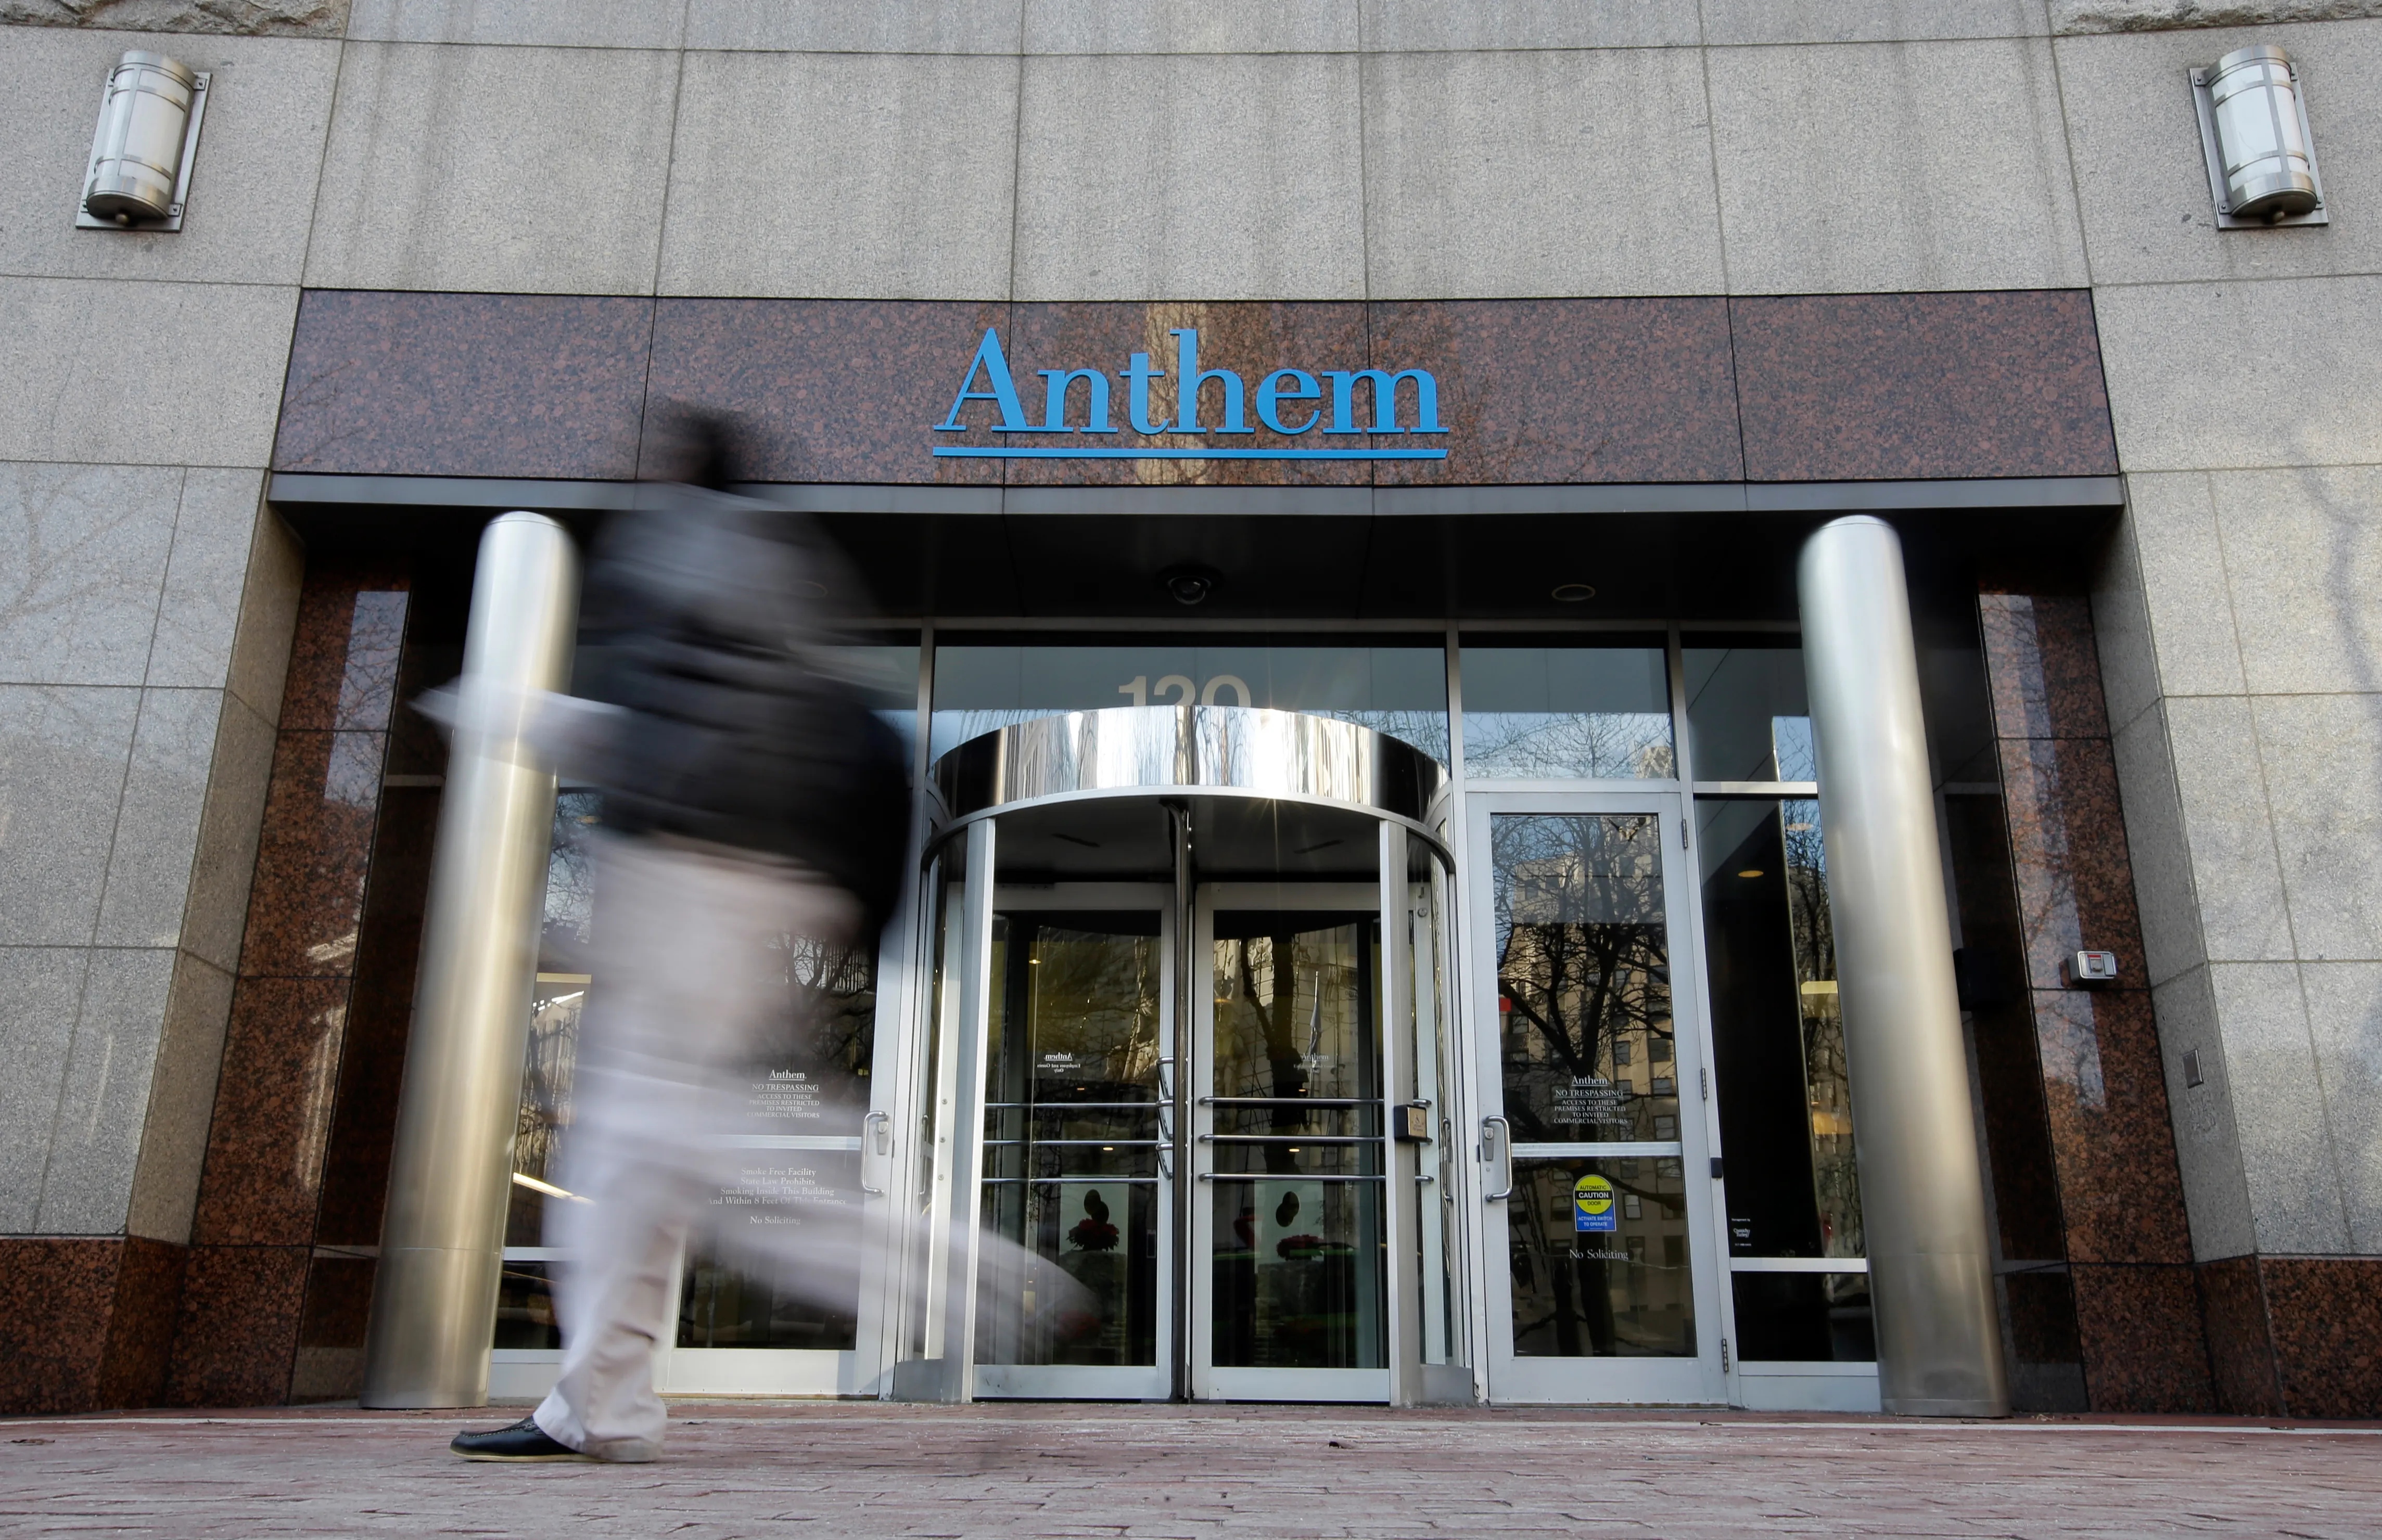 Anthem Health Insurance Was Hacked. Here's What Customers Need to Know